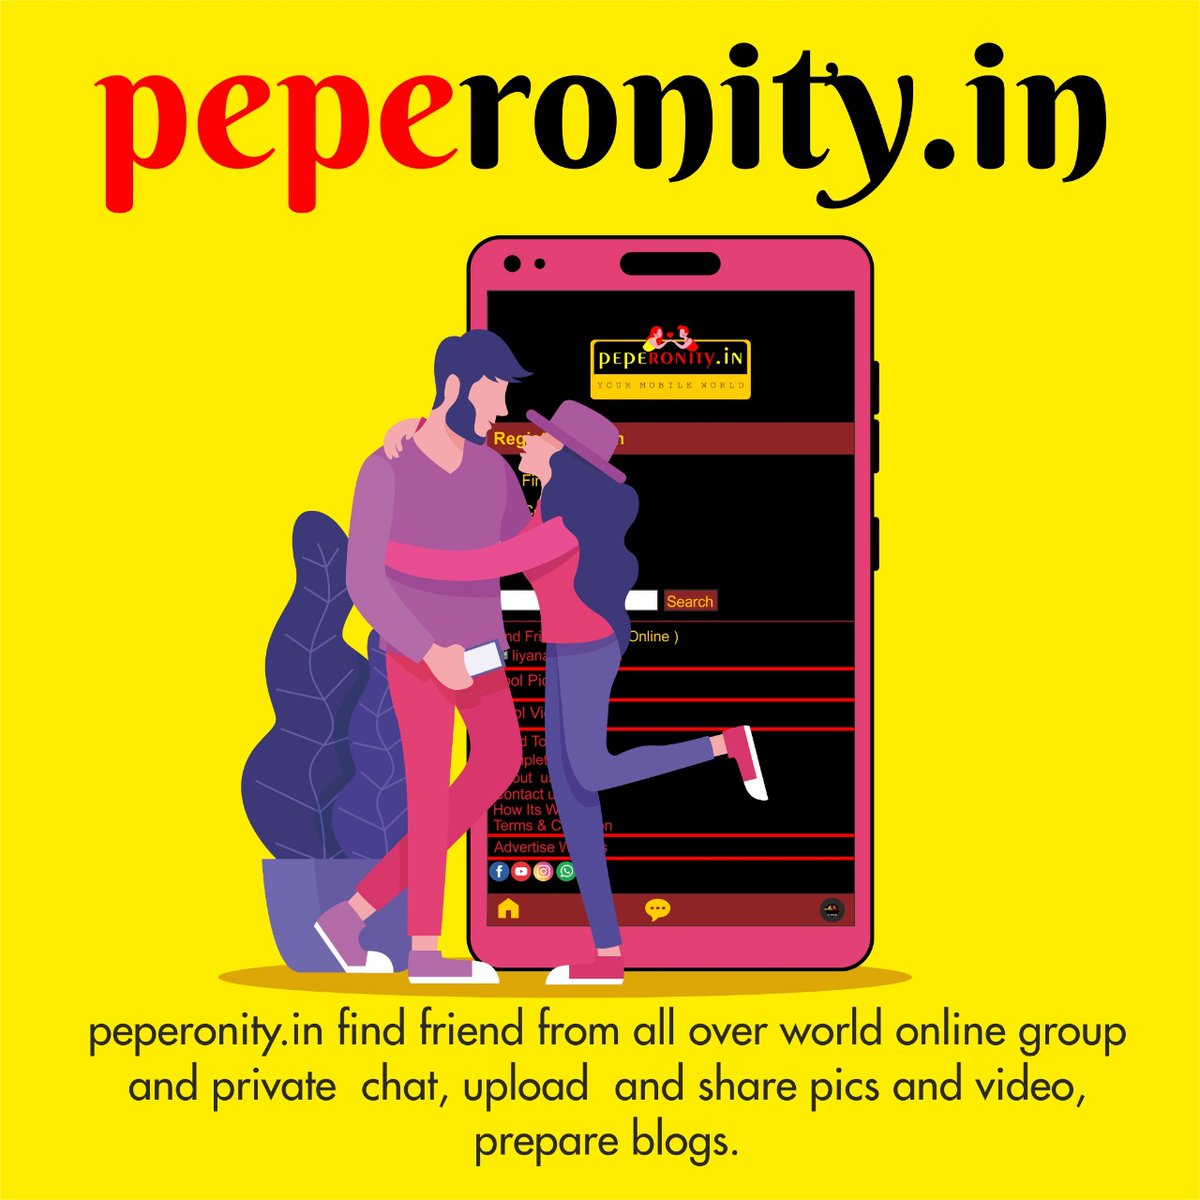 Friends peperonity find 52 People